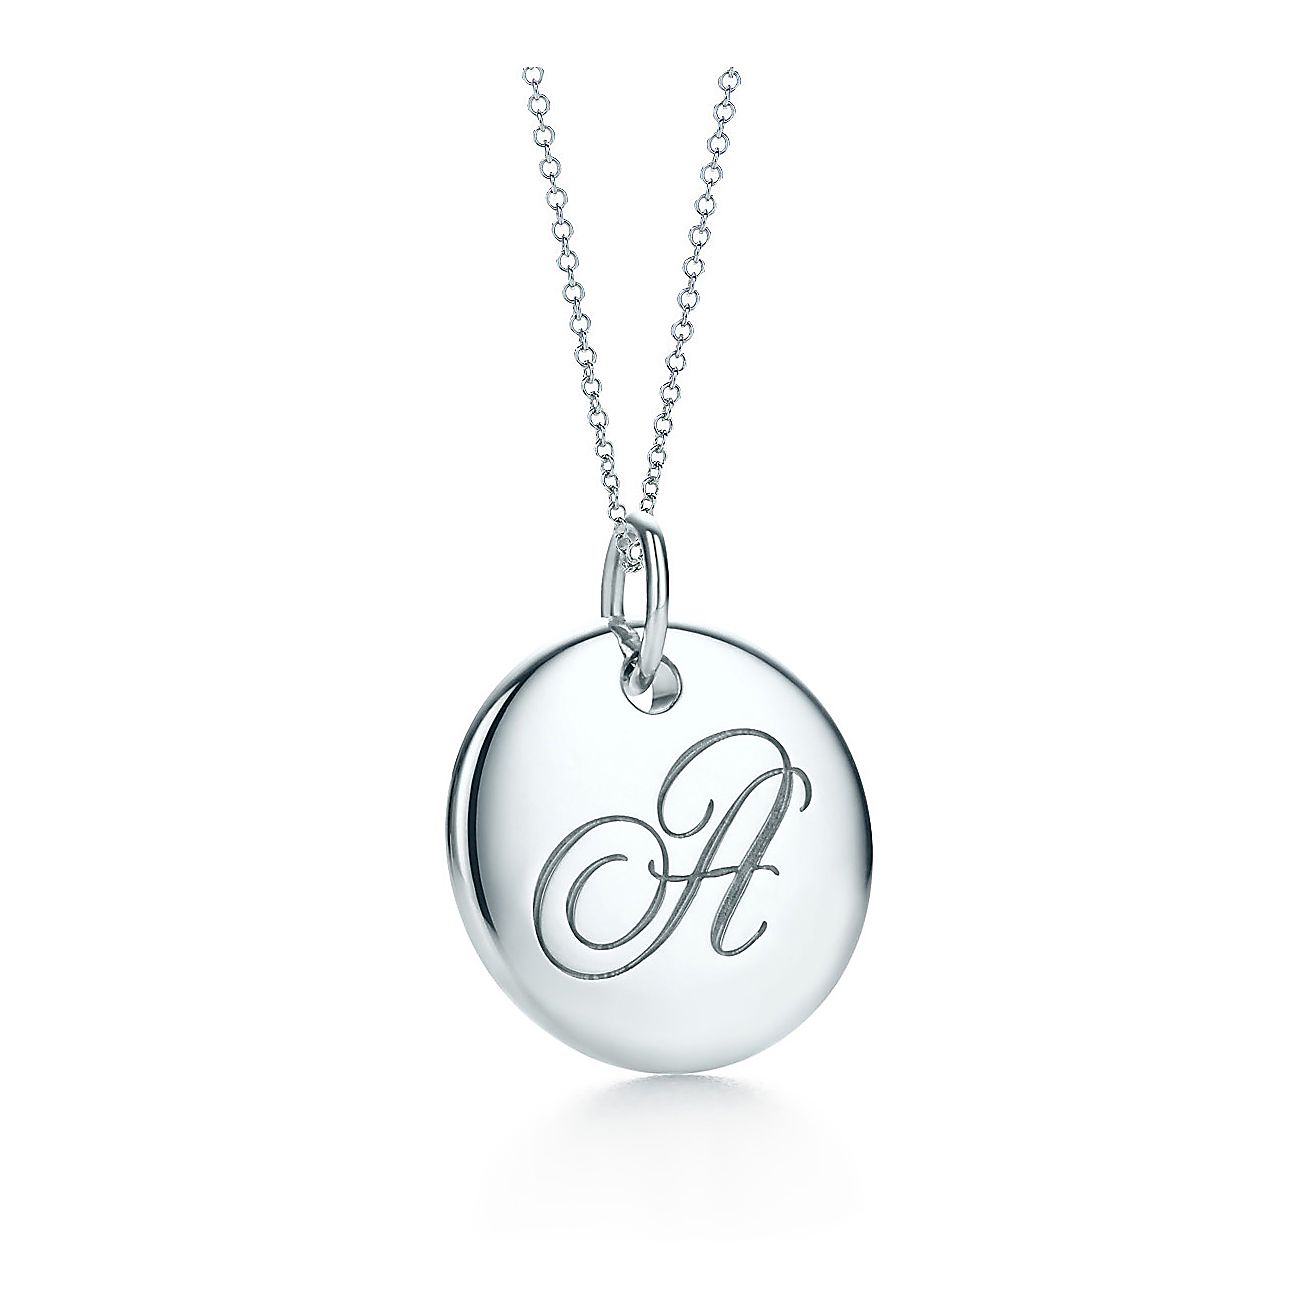 Tiffany Notes alphabet disc charm in silver on a chain. Letters A-Z